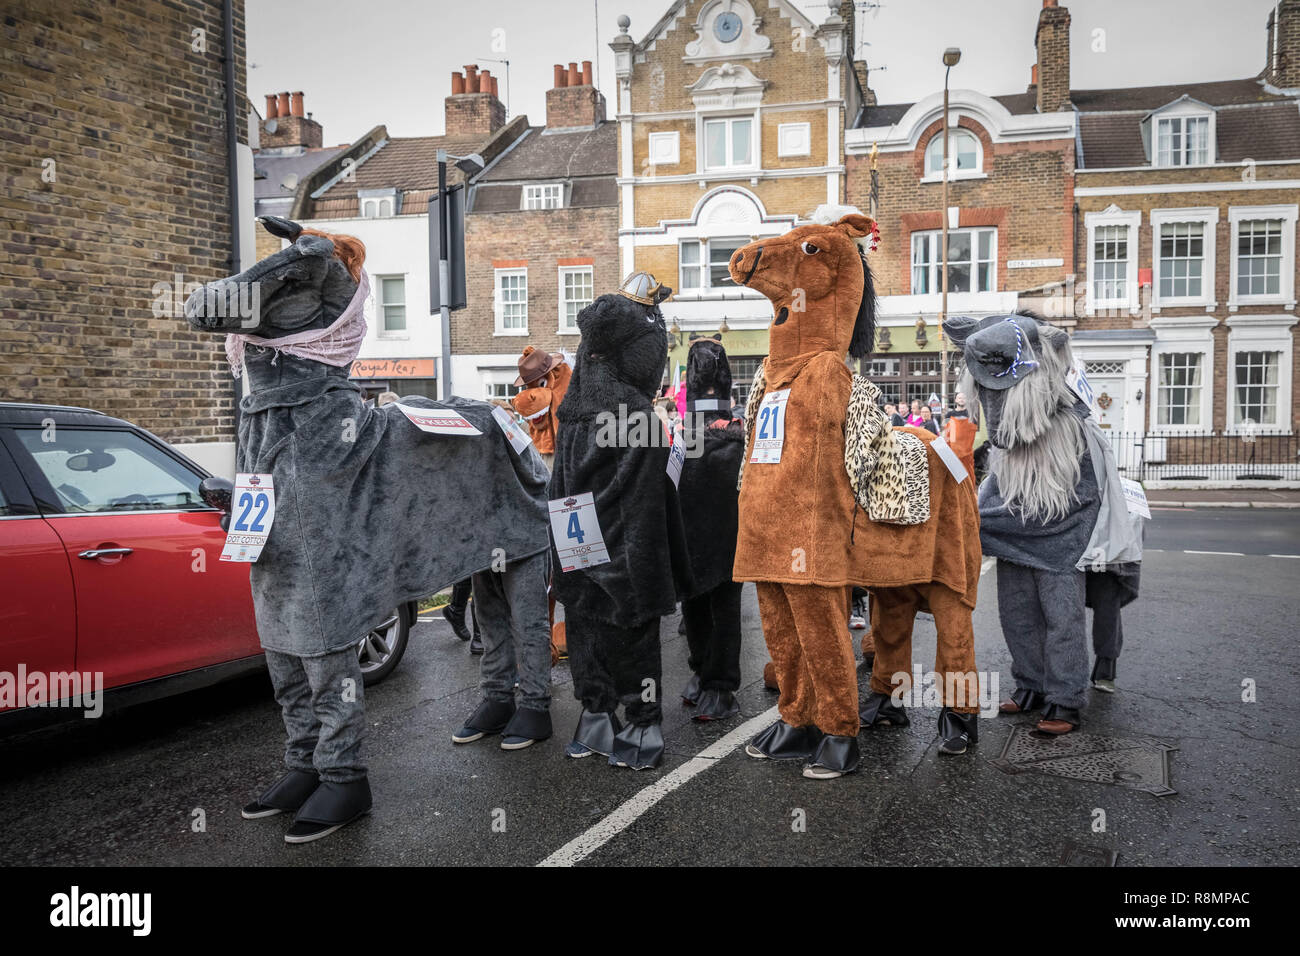 London, UK. 16th Dec 2018. Annual Christmas London Pantomime Horse Race in Greenwich. Credit: Guy Corbishley/Alamy Live News Stock Photo